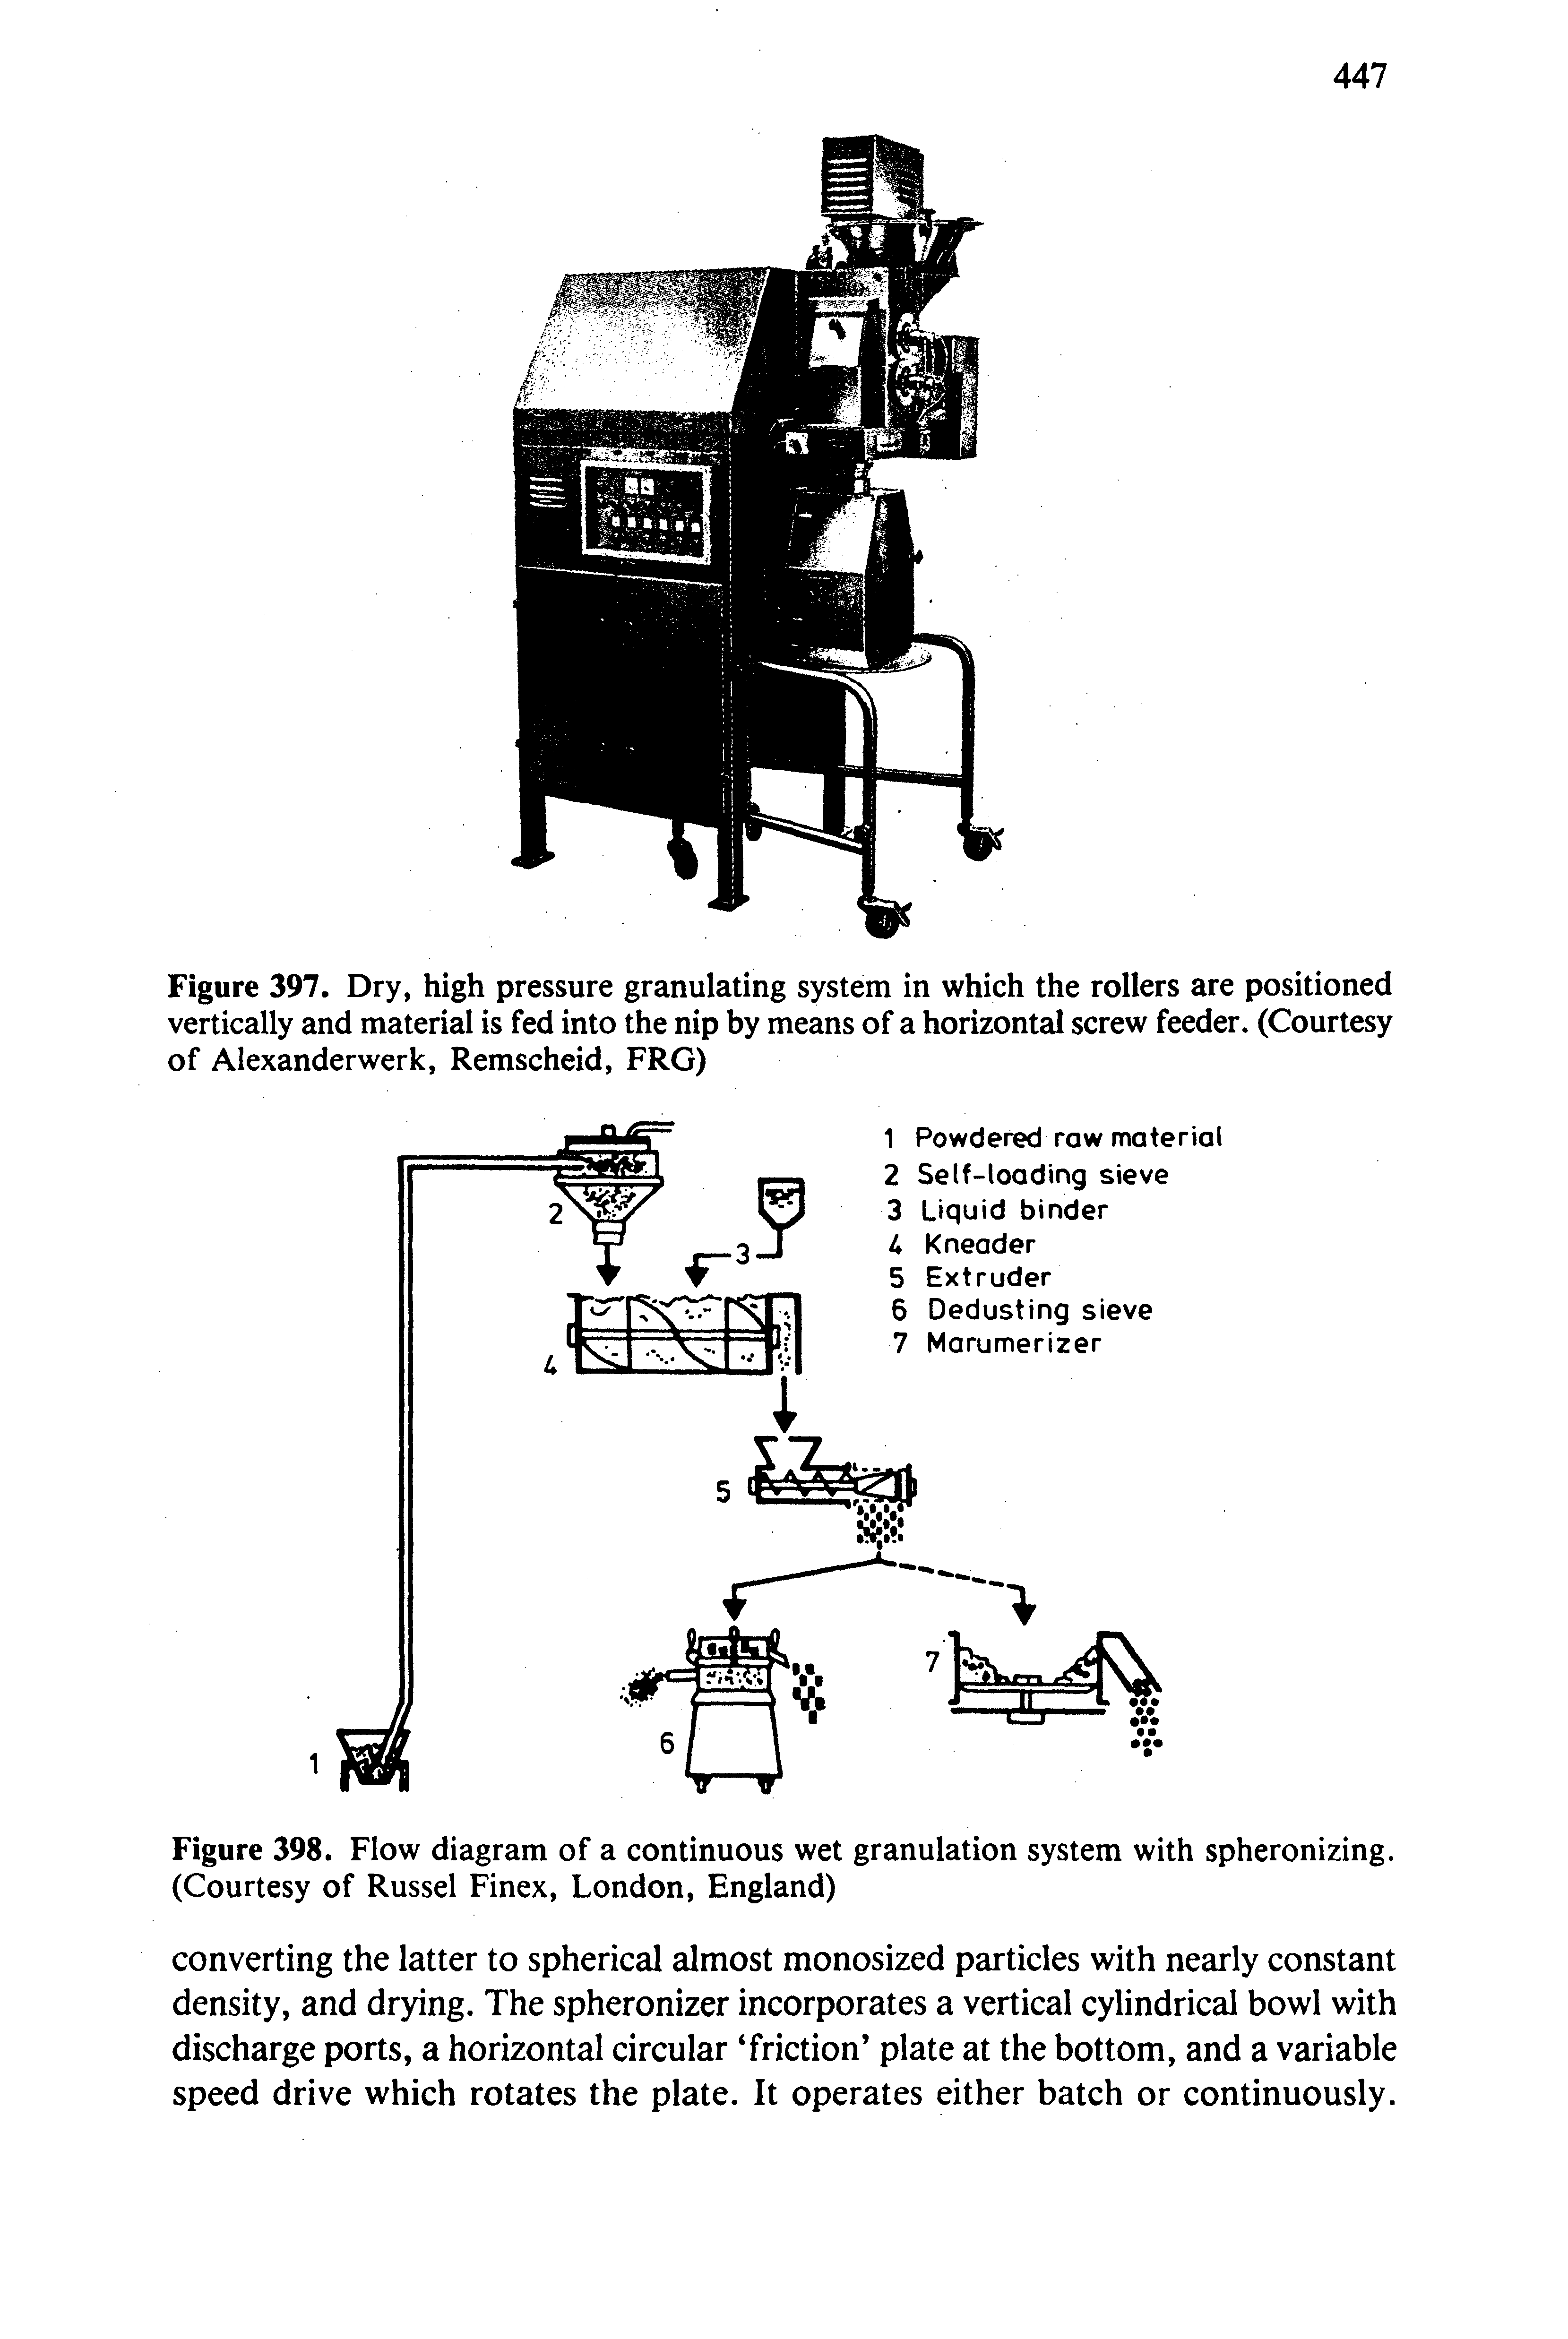 Figure 398. Flow diagram of a continuous wet granulation system with spheronizing. (Courtesy of Russel Finex, London, England)...